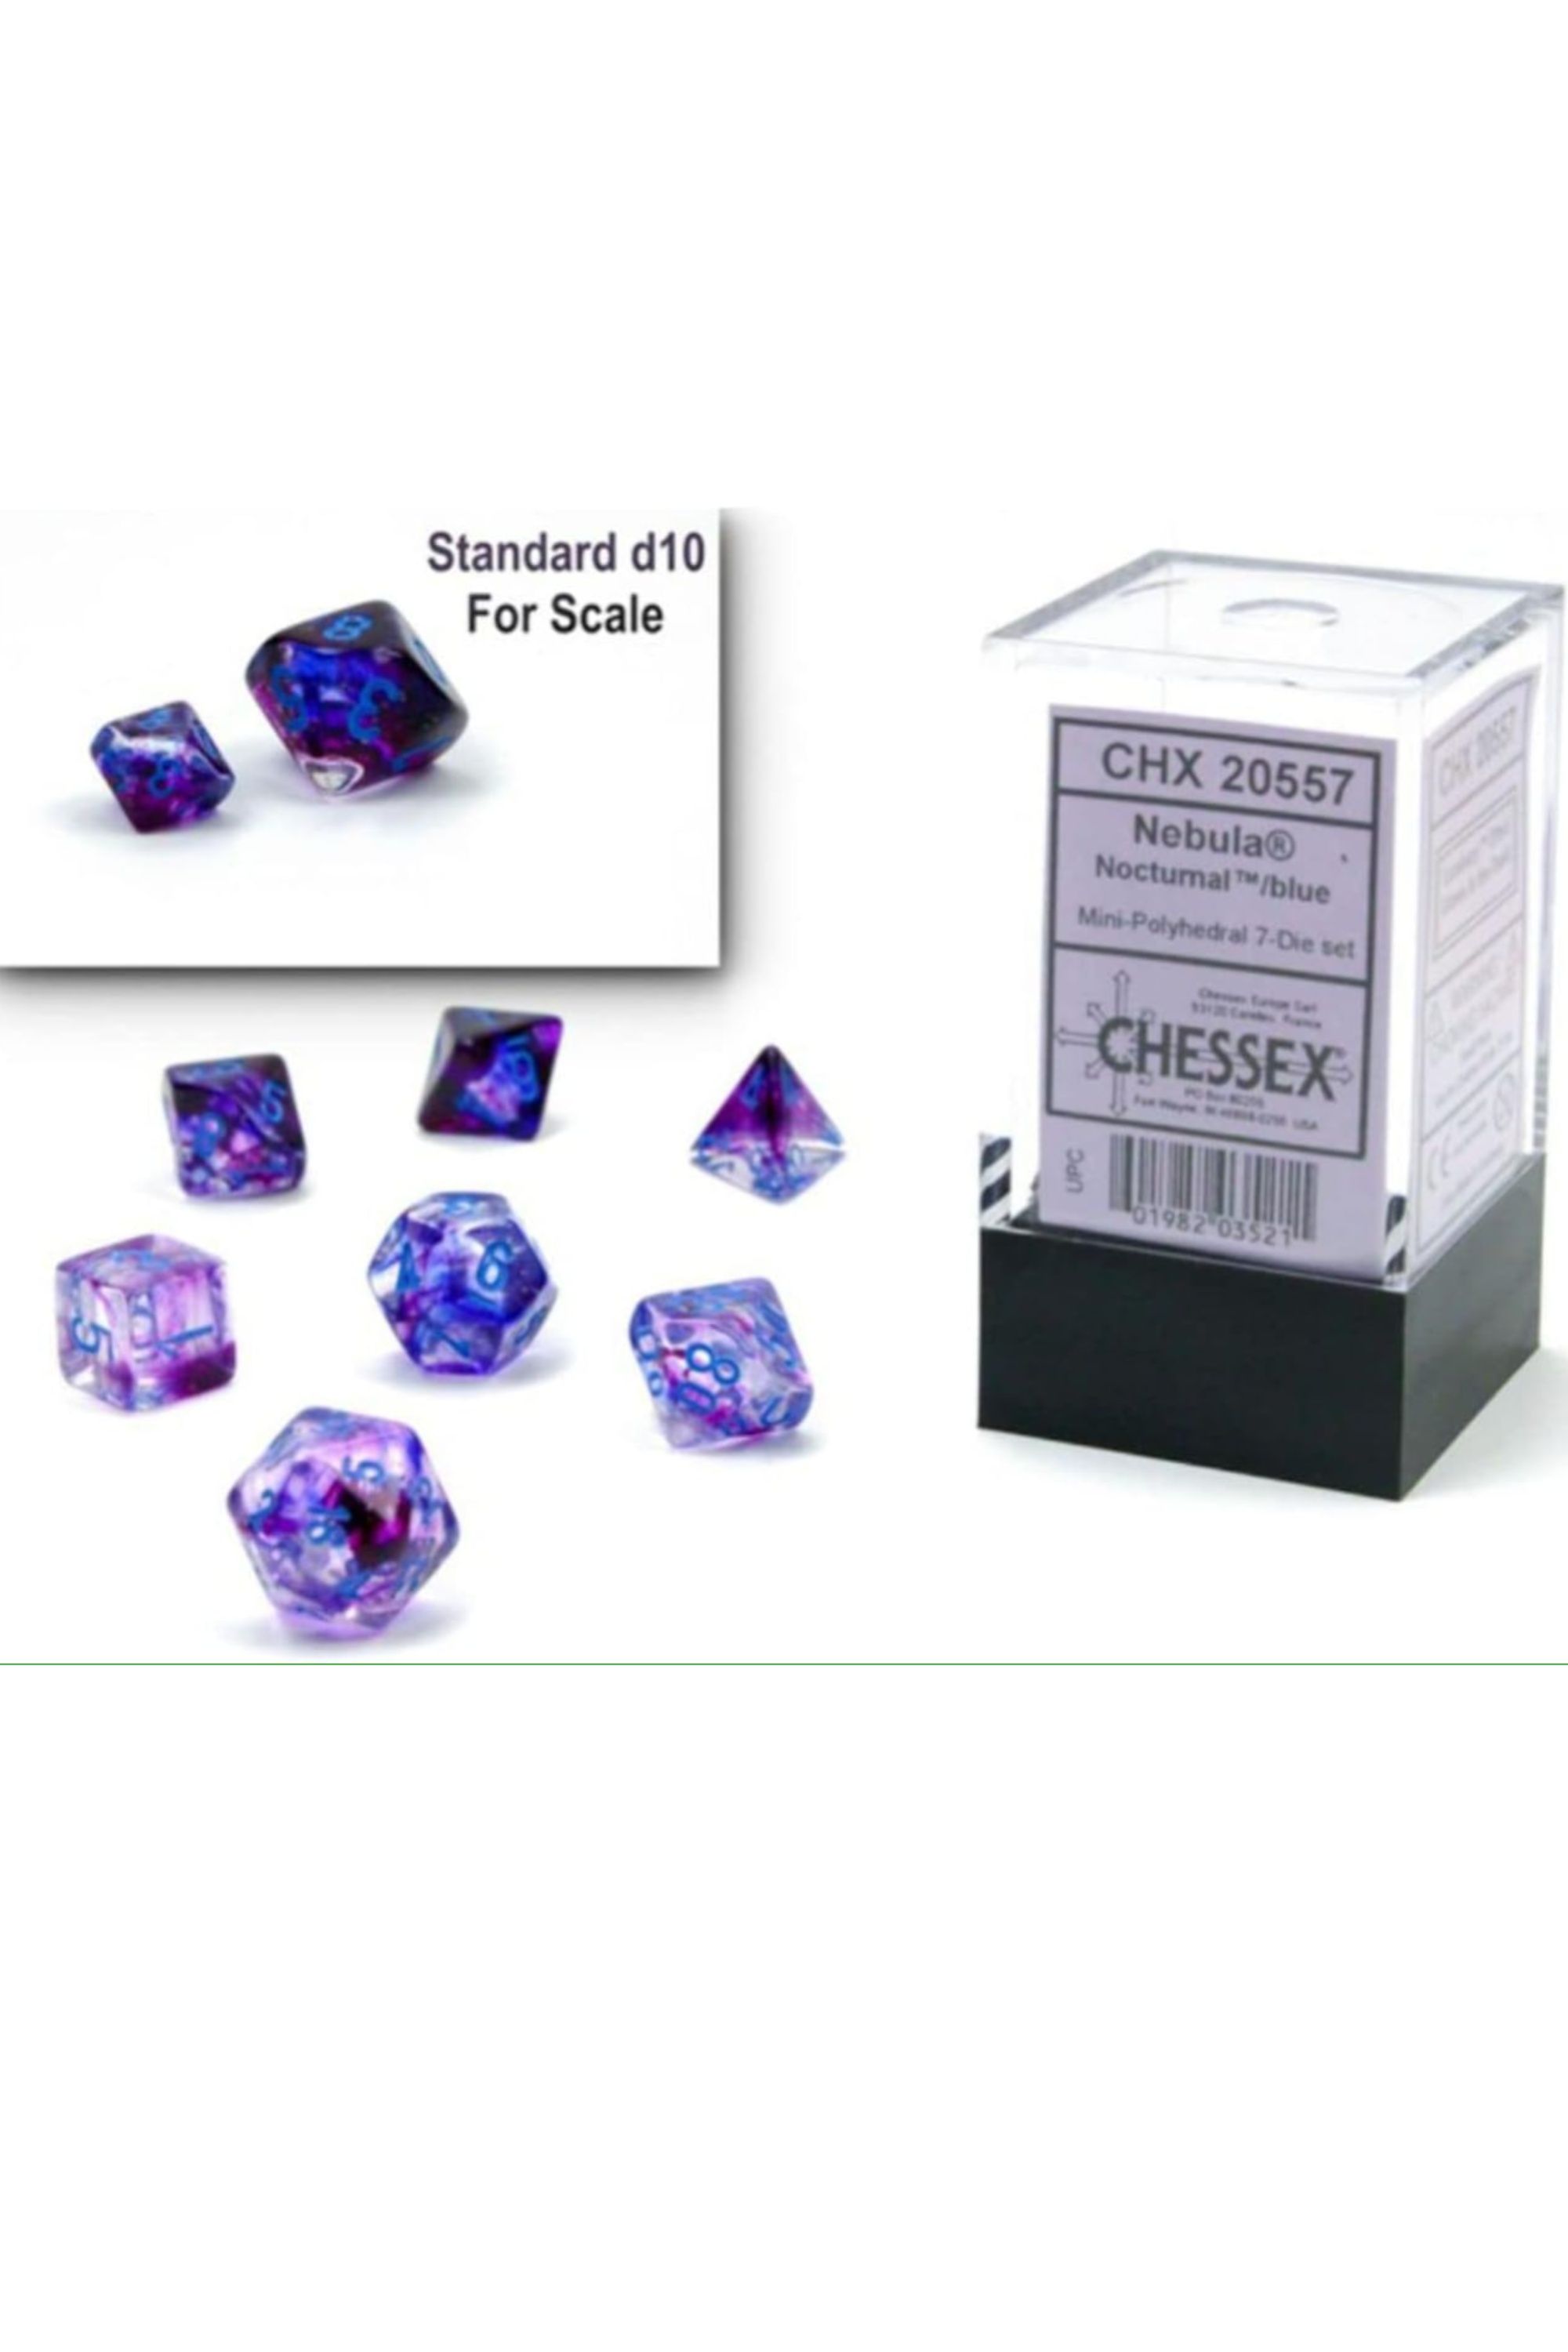 dnd chessex dice set purple with a chessex dice box next to them